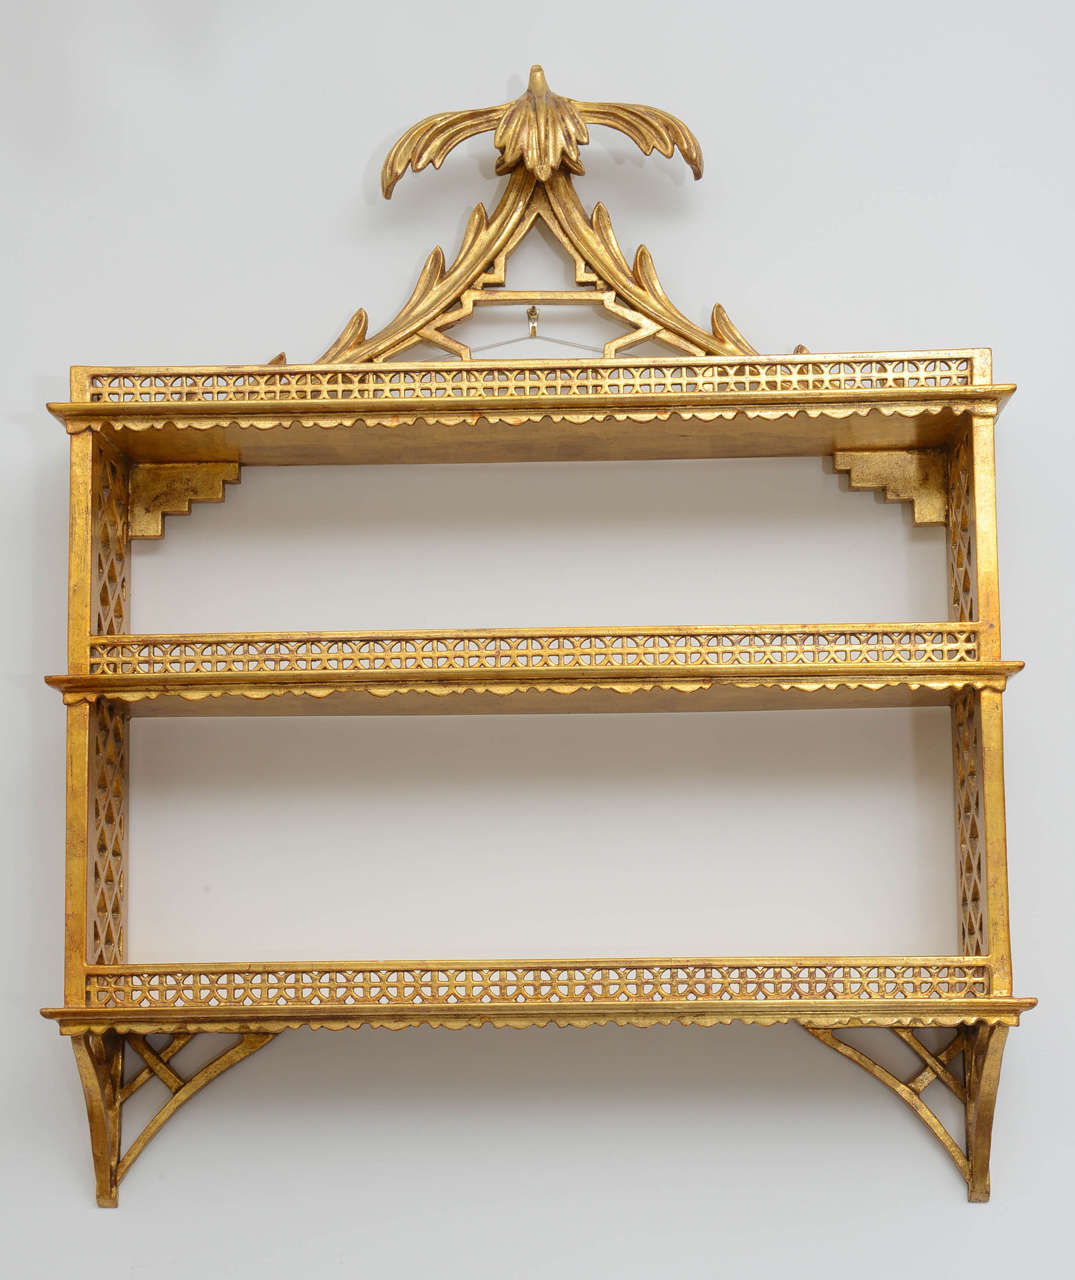 Hollywood Regency Style carved and gilded wood pagoda wall shelf.  Beautifully detailed with fretwork and fronds.